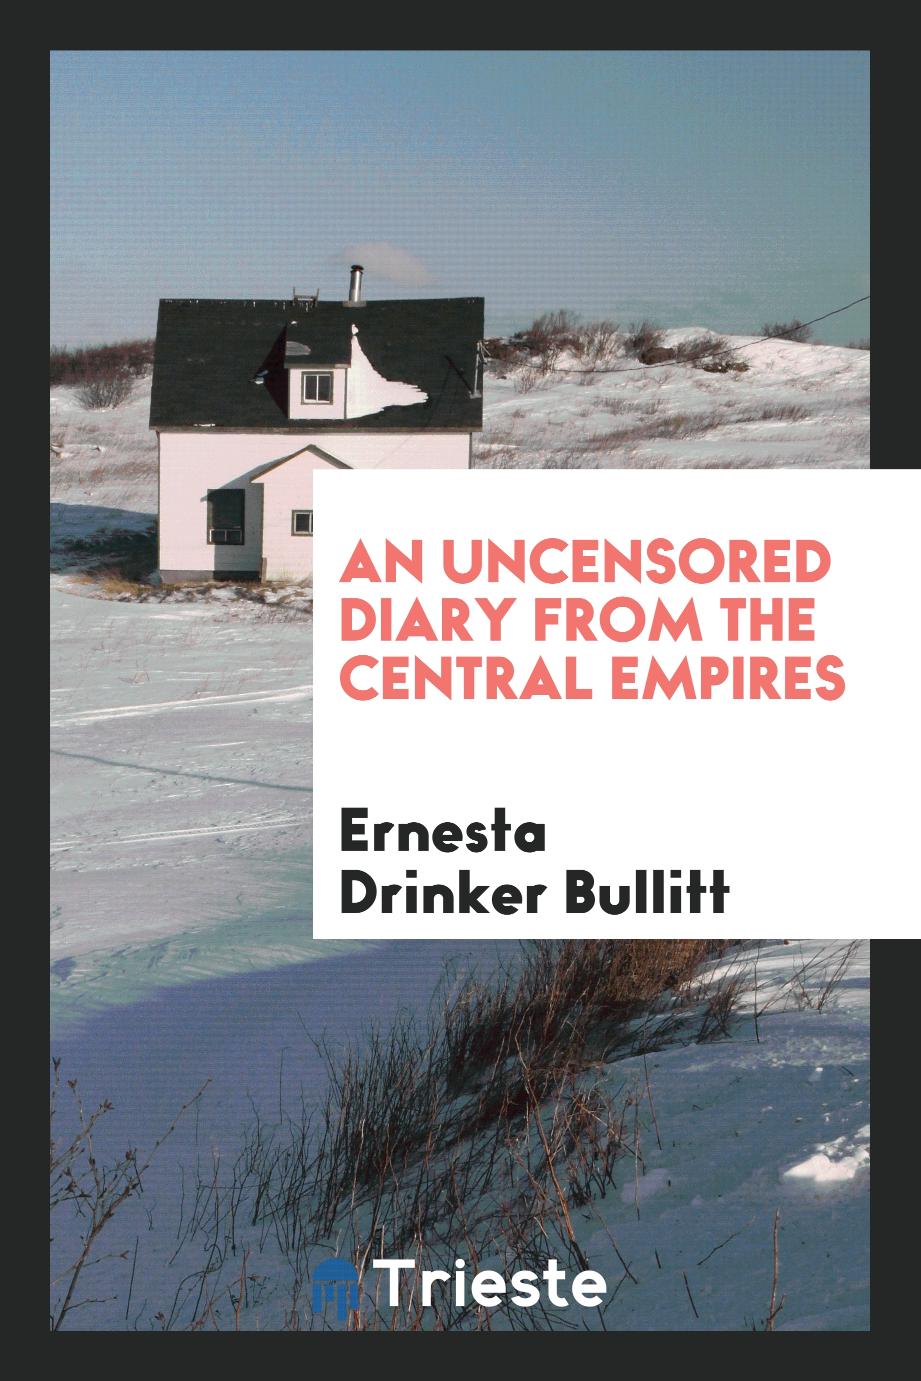 An uncensored diary from the central empires